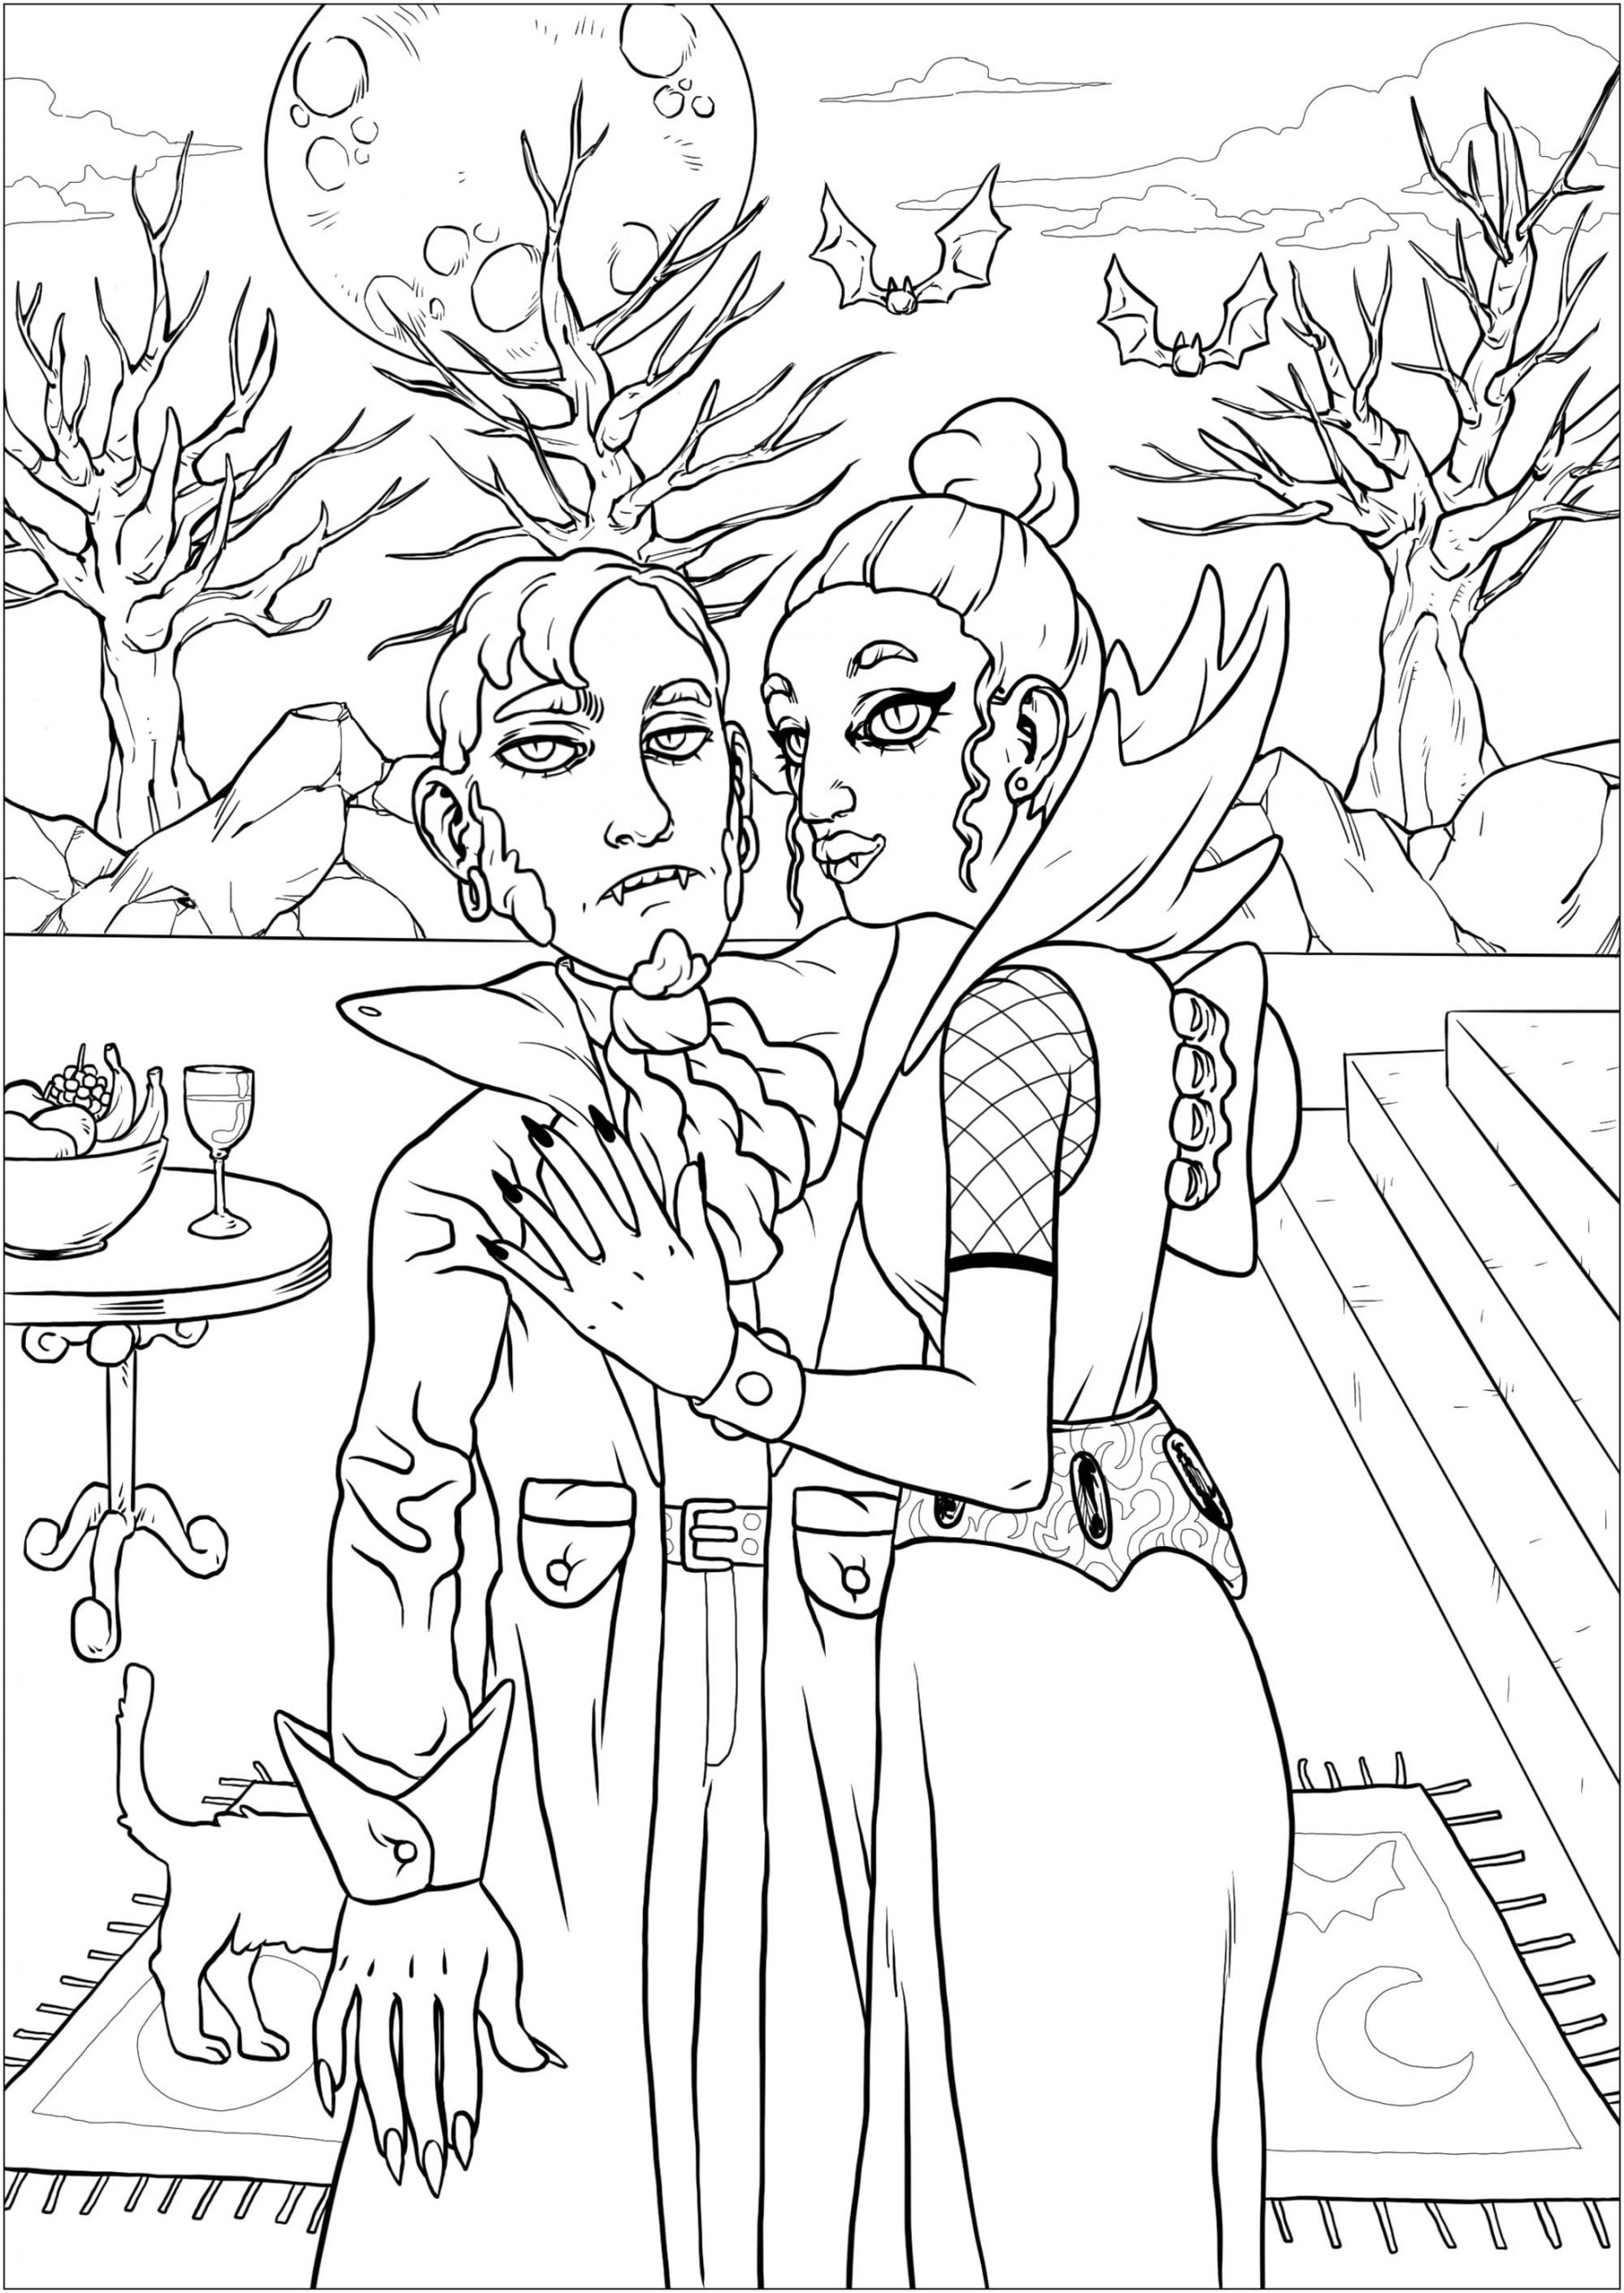 Couple Of Vampires Image For Kids Coloring Page